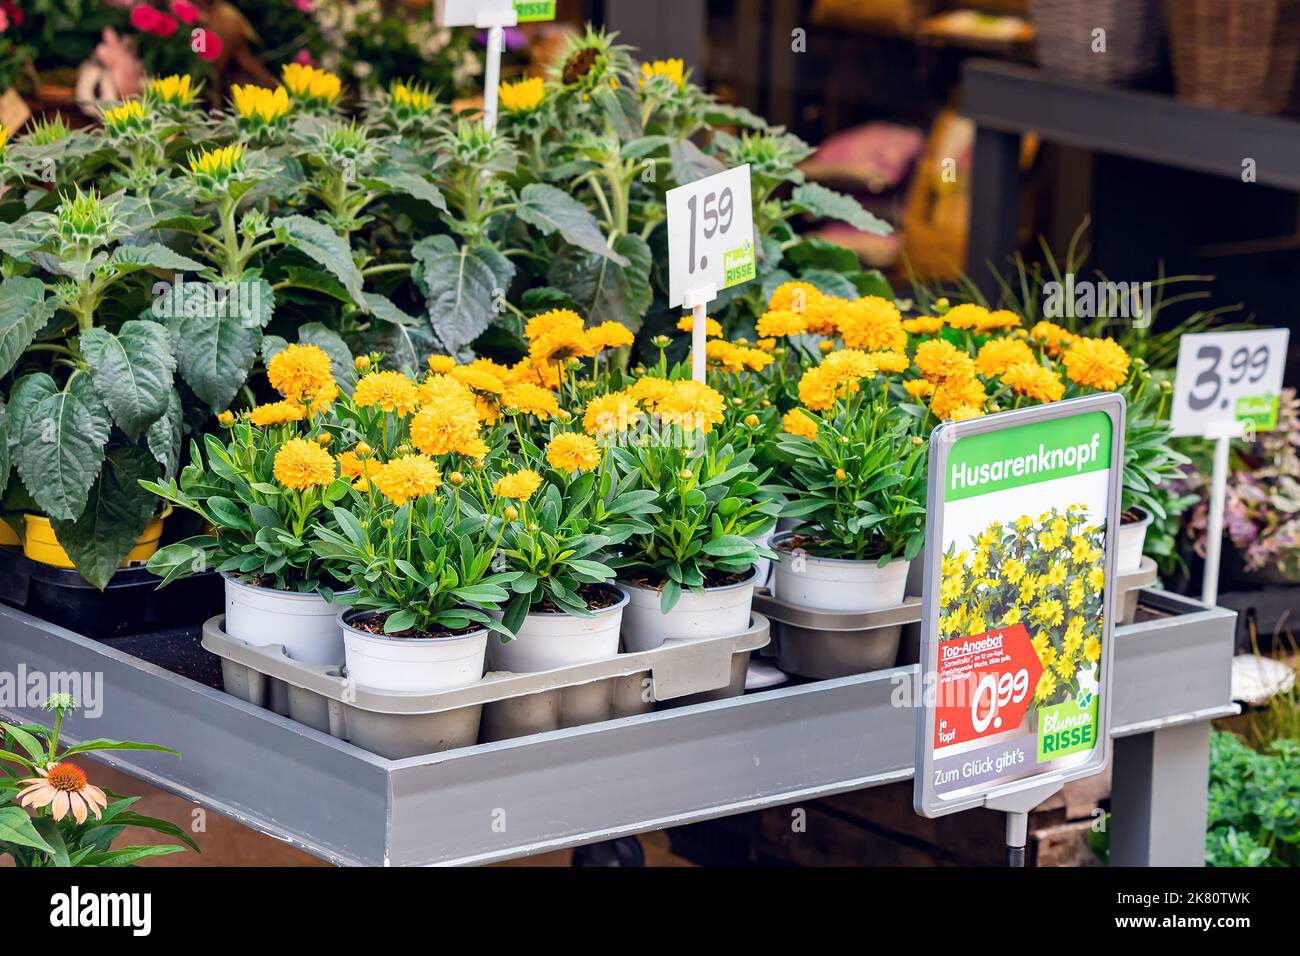 25 July 2022, Osnabruck, Germany: Mexican creeping zinnia Plant and flowers in pots for sale at florist market or shop Stock Photo